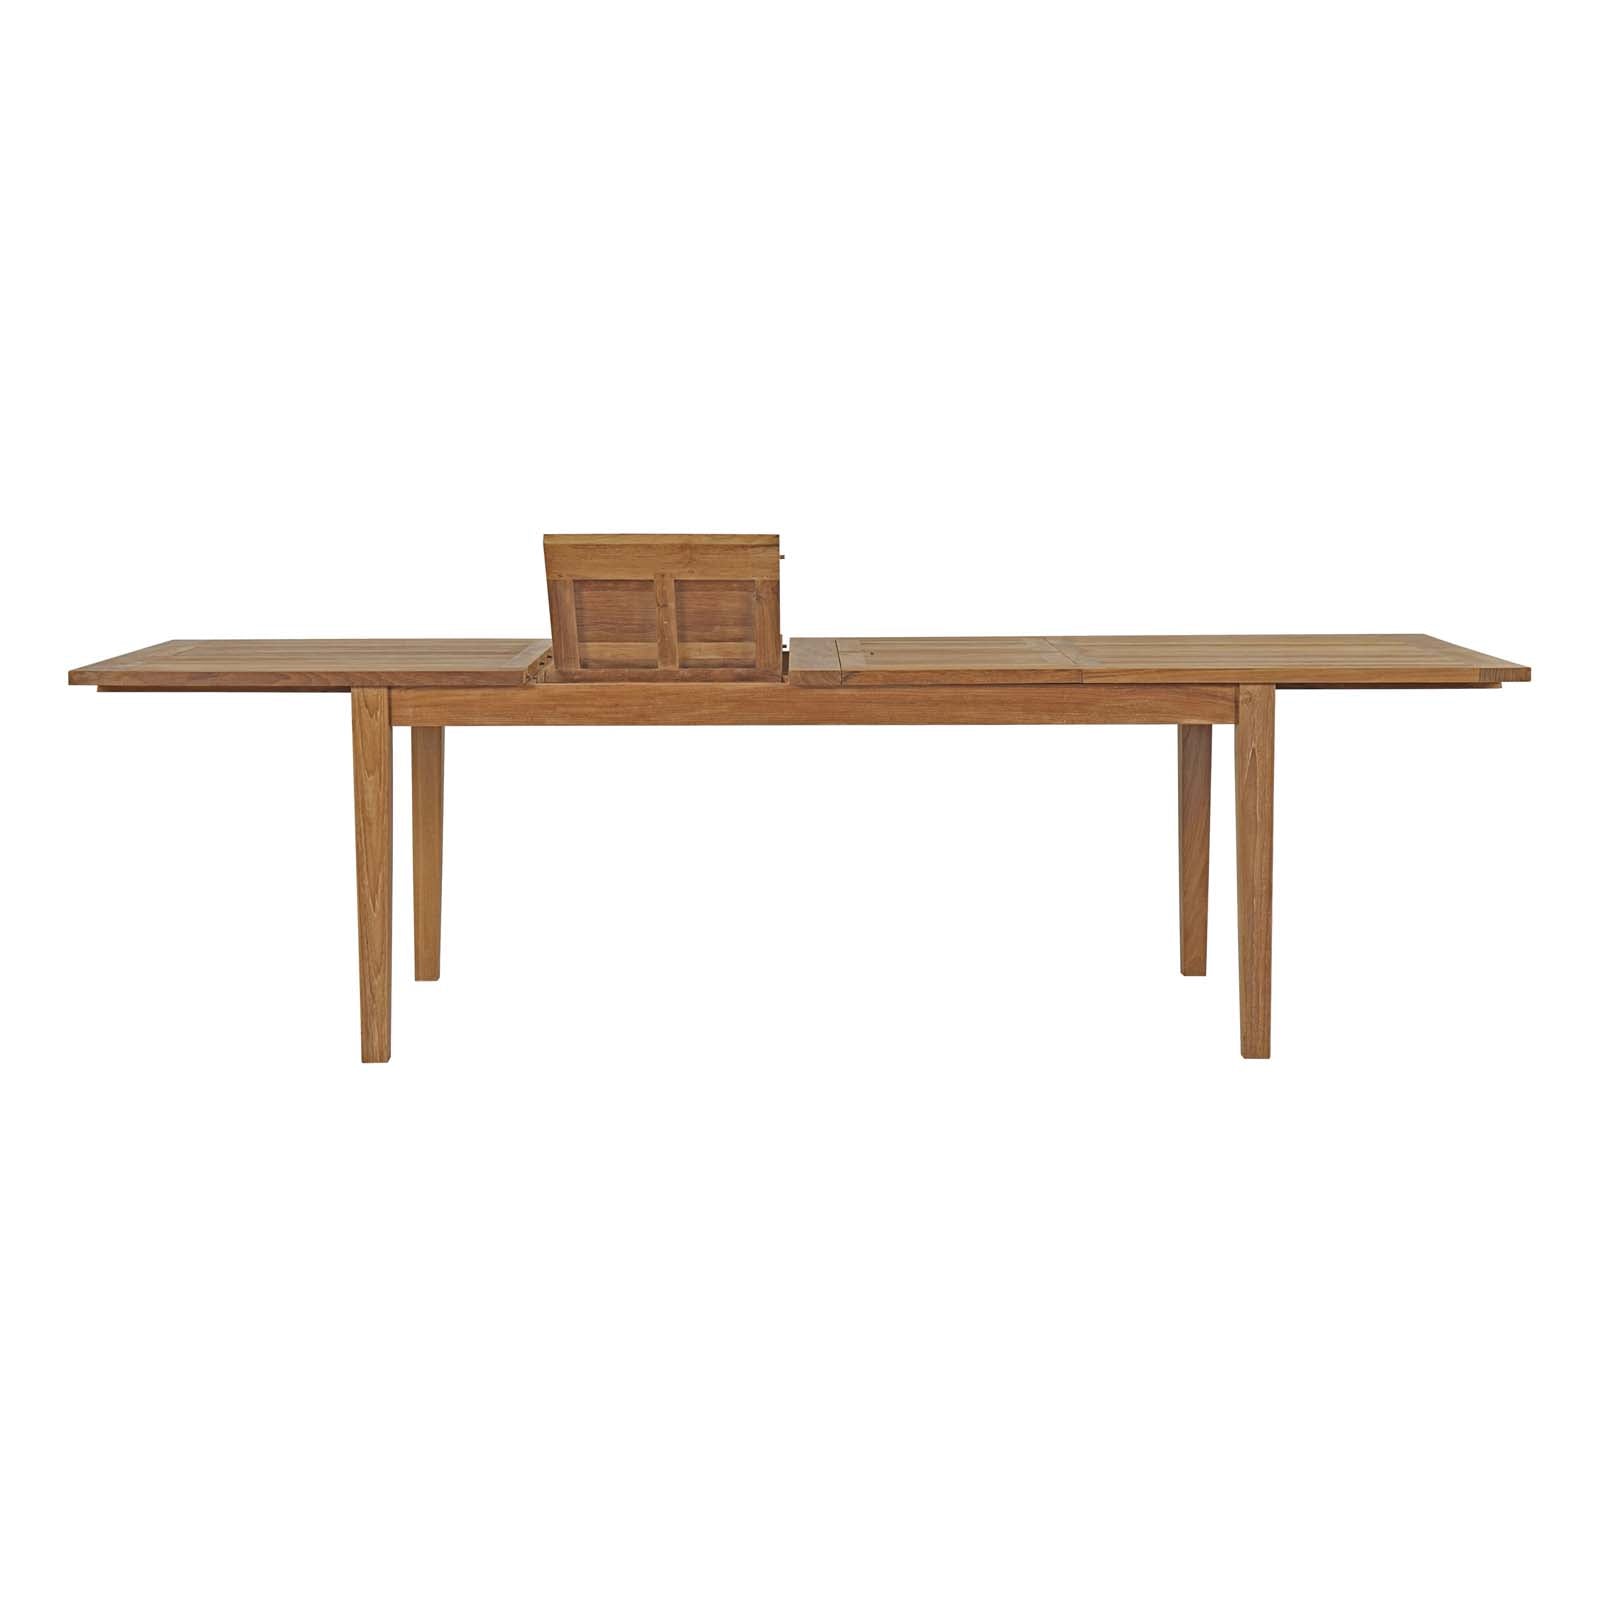 Marina Extendable Outdoor Patio Teak Dining Table - East Shore Modern Home Furnishings